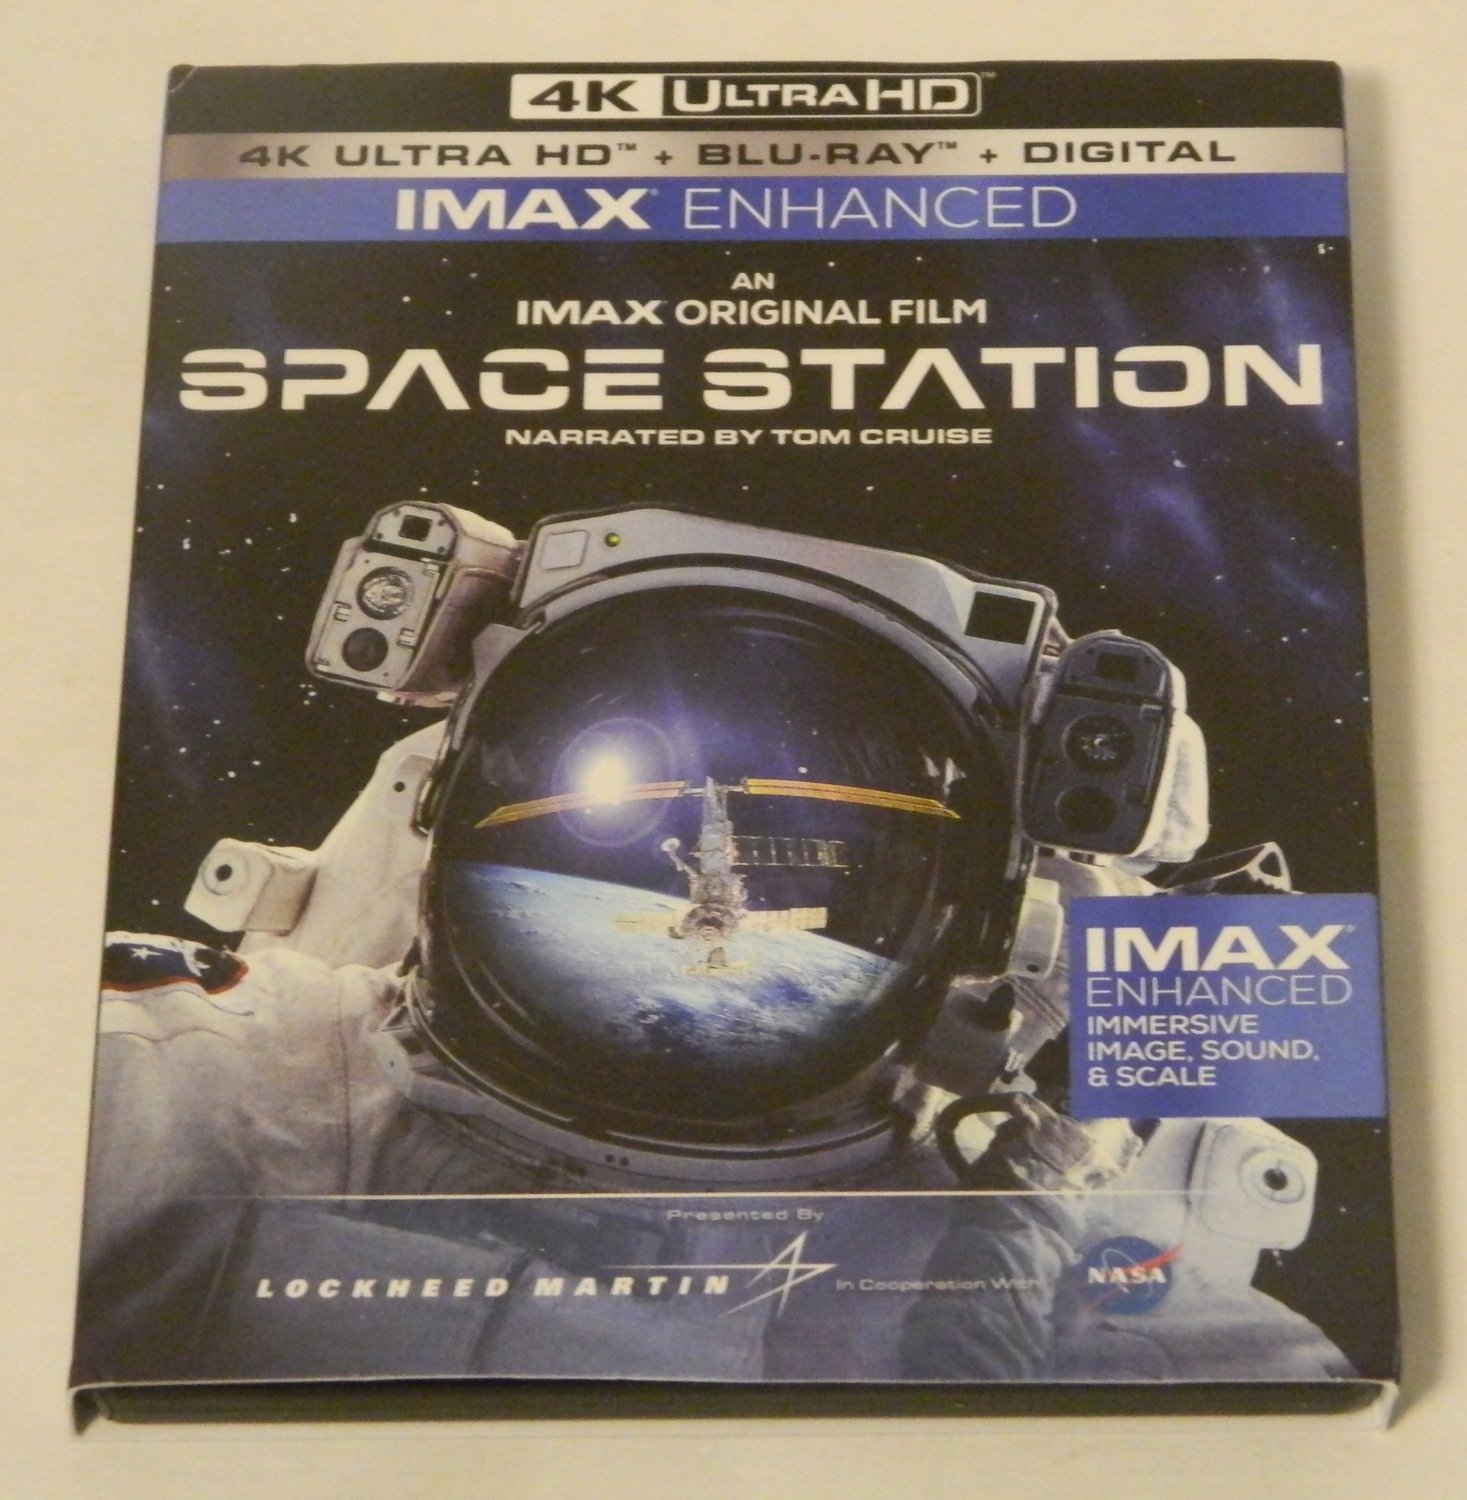 IMAX Space Station 4K Ultra HD/Blu-ray Review